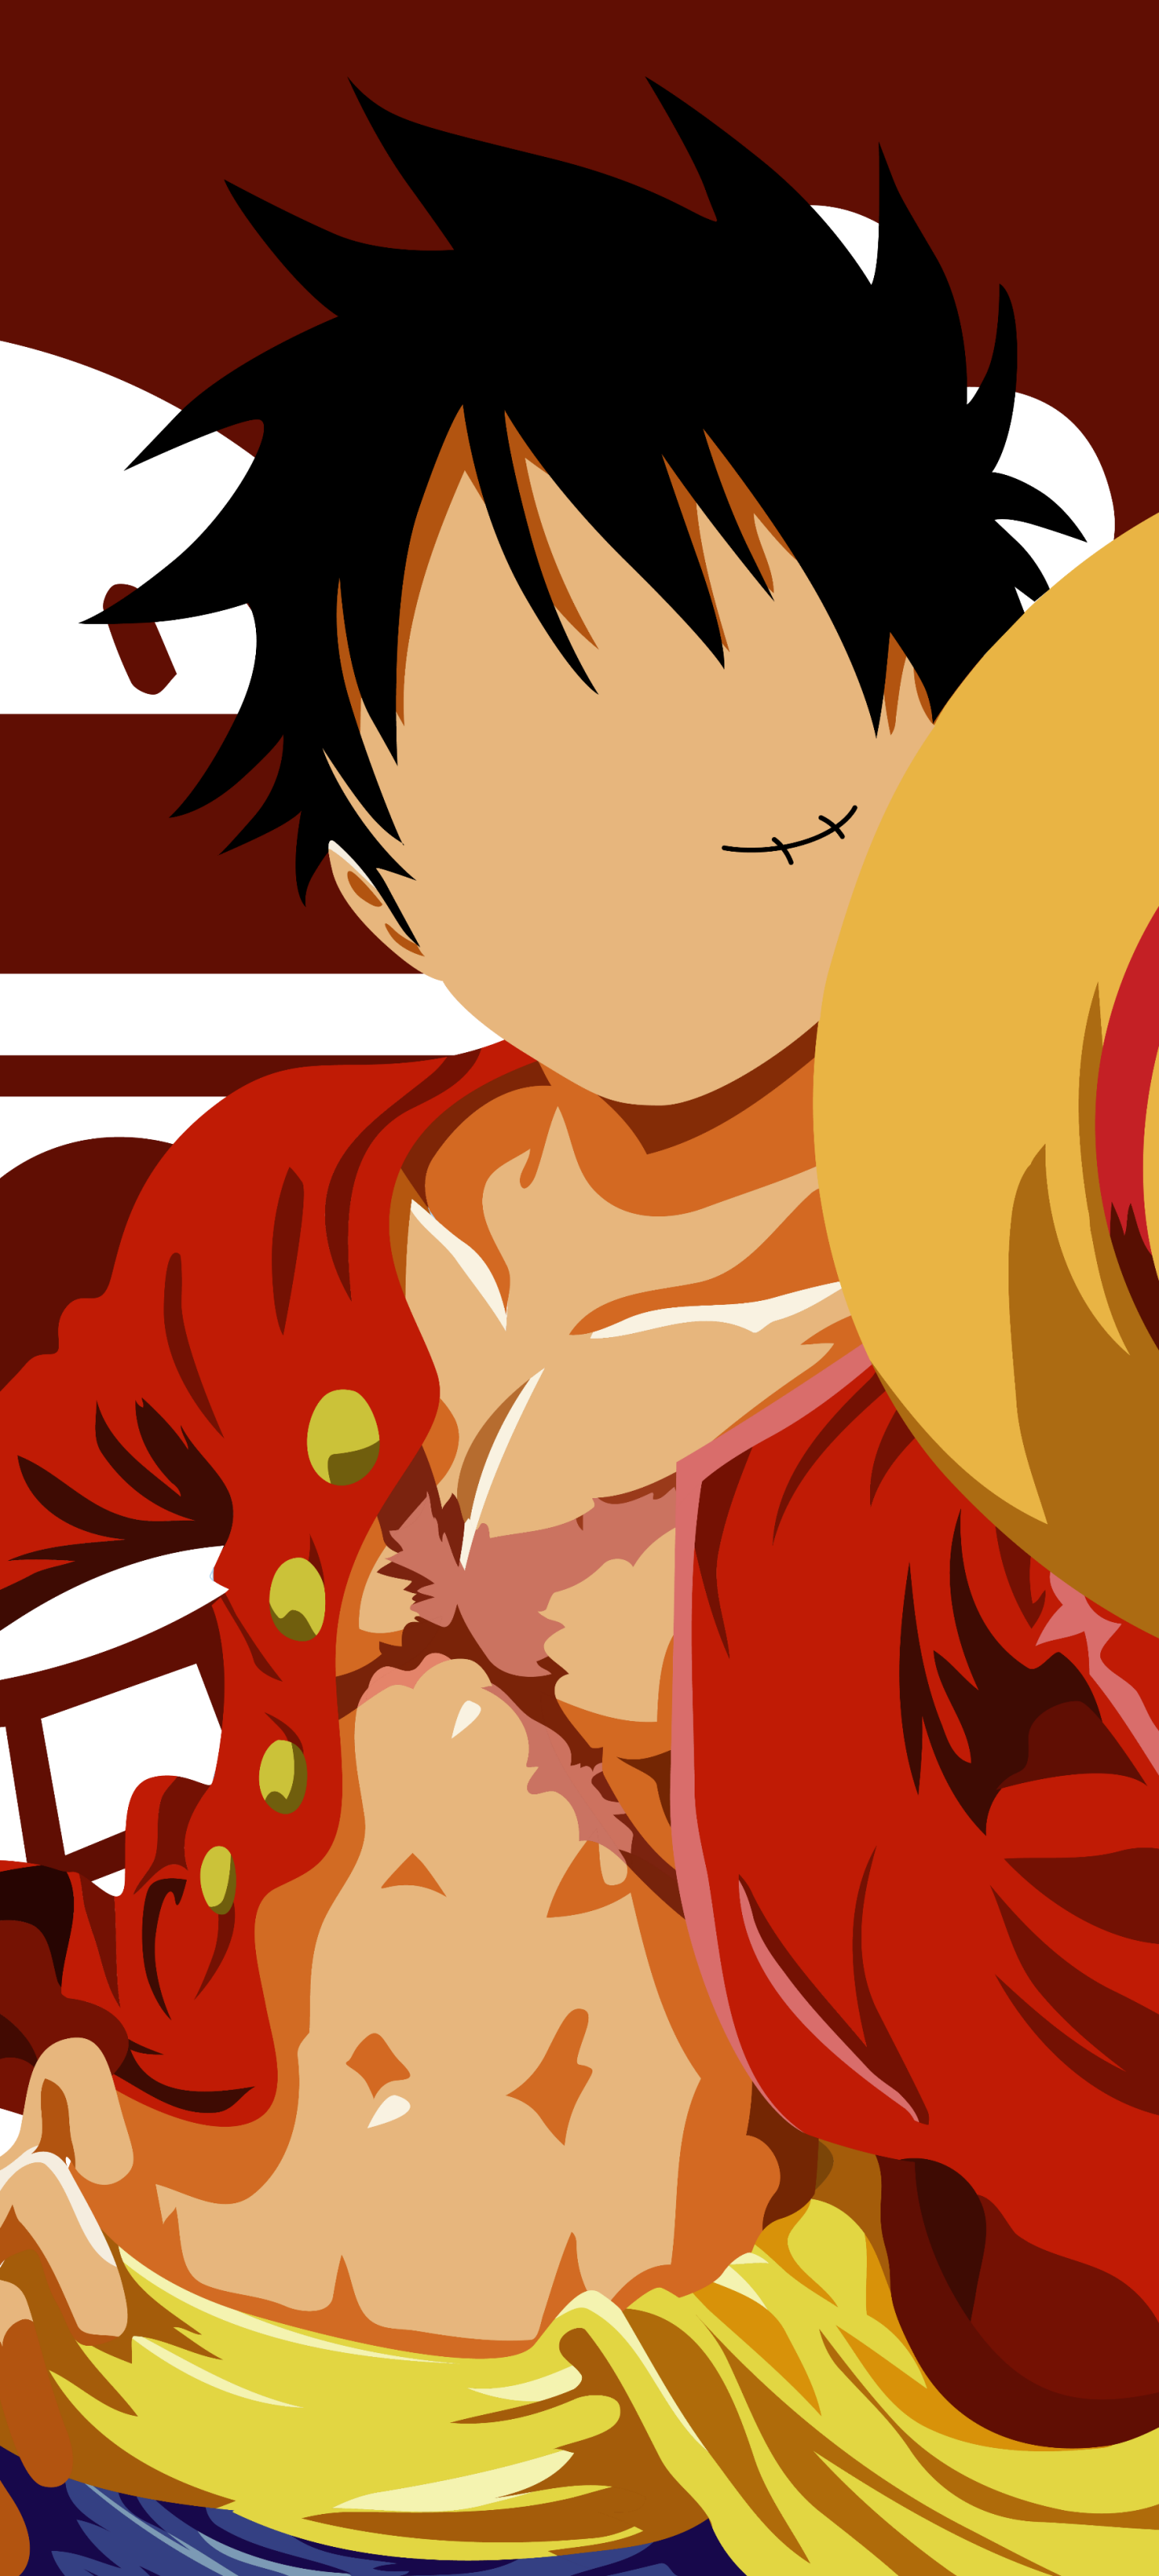 Anime One Piece Phone Wallpaper by んーけ - Mobile Abyss